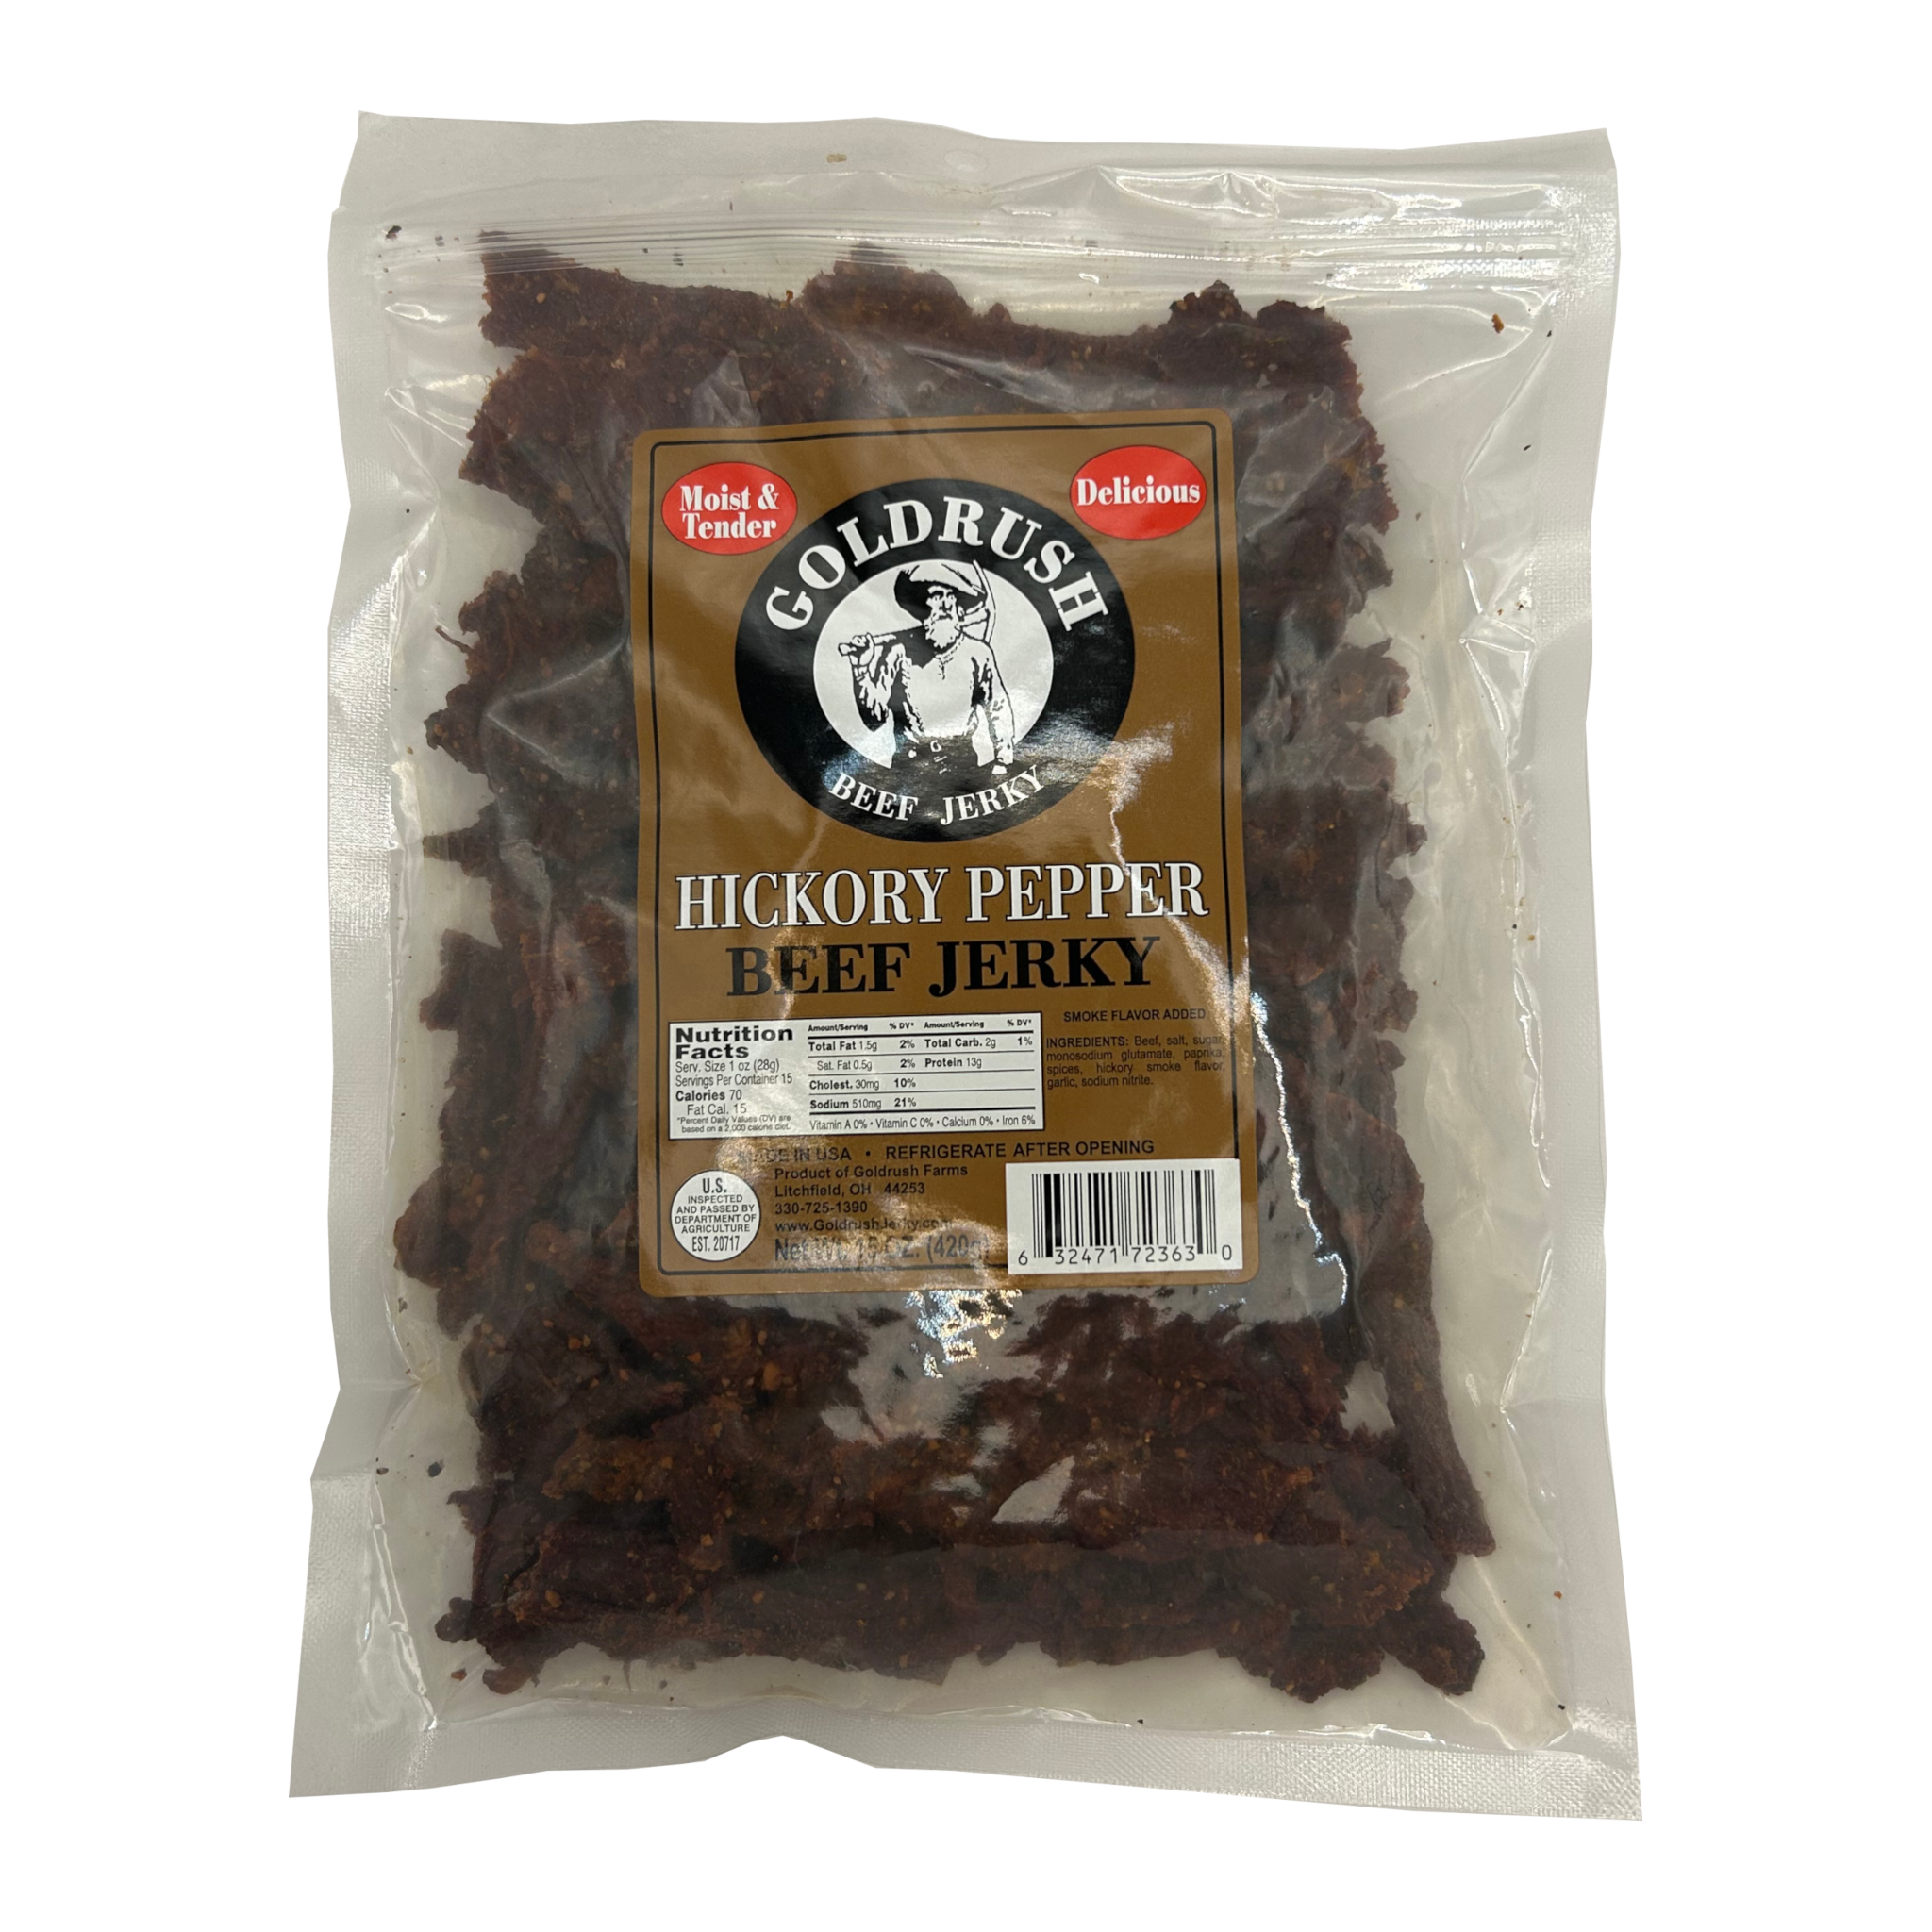 Hickory Pepper Beef Jerky